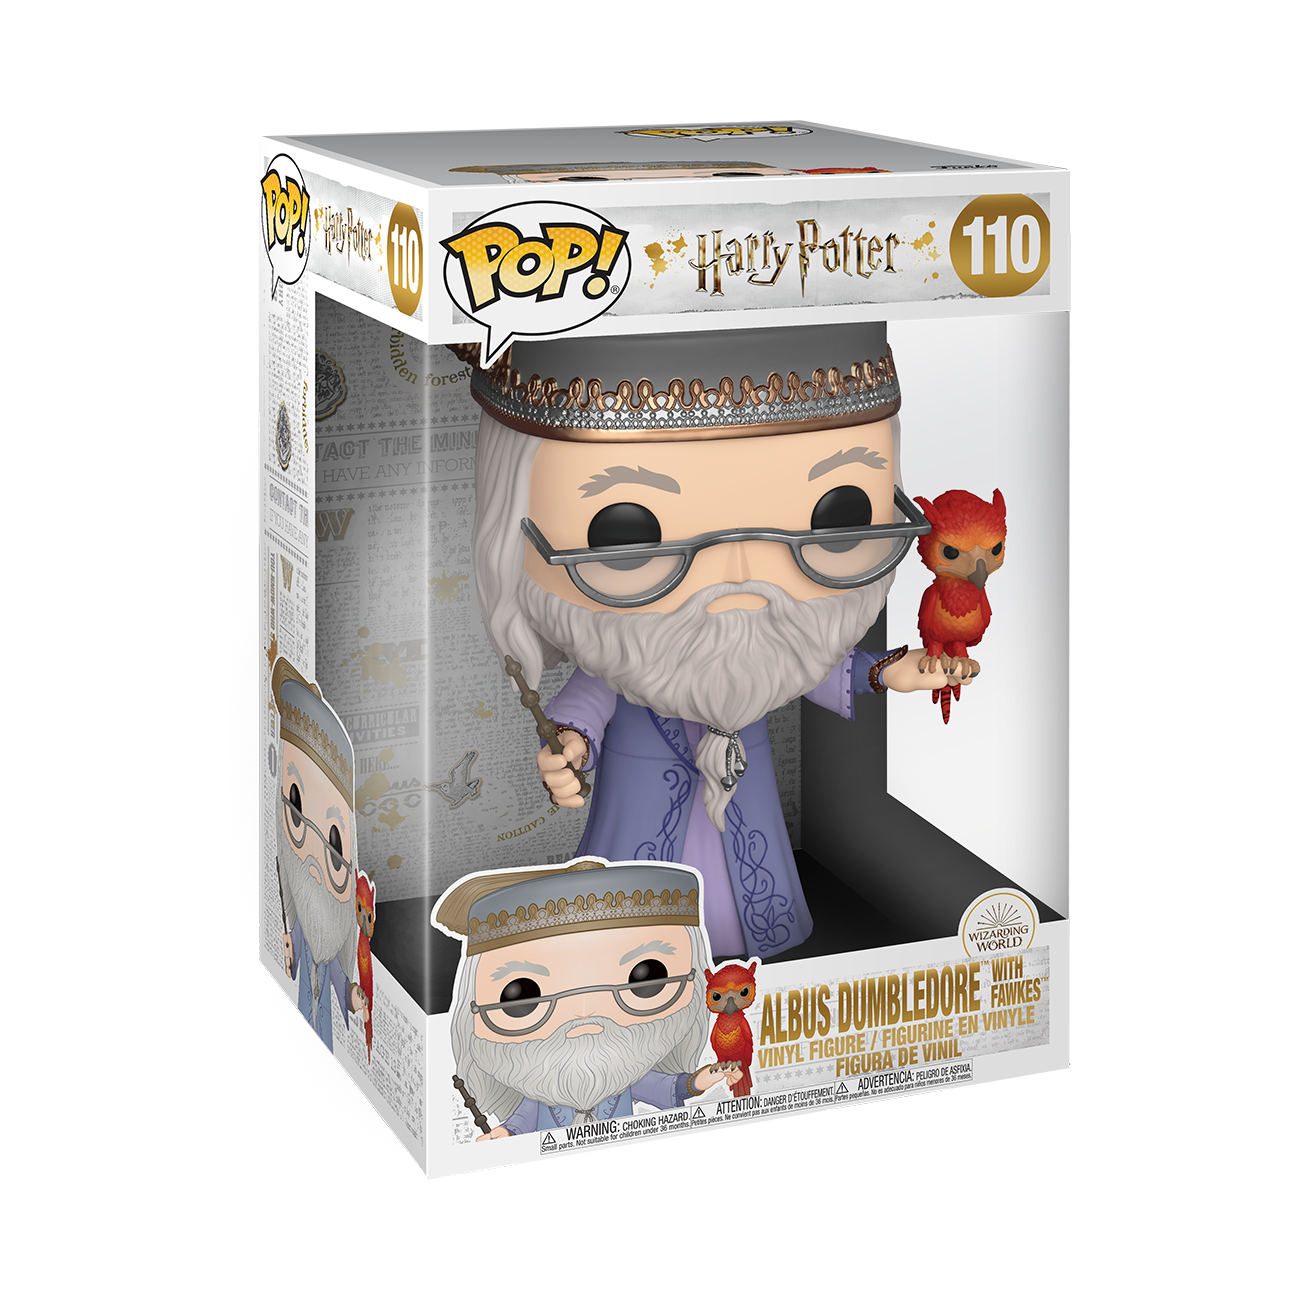 Funko Pop! Jumbo: Harry Potter - Dumbledore with Fawkes 10" Super Sized Pop!